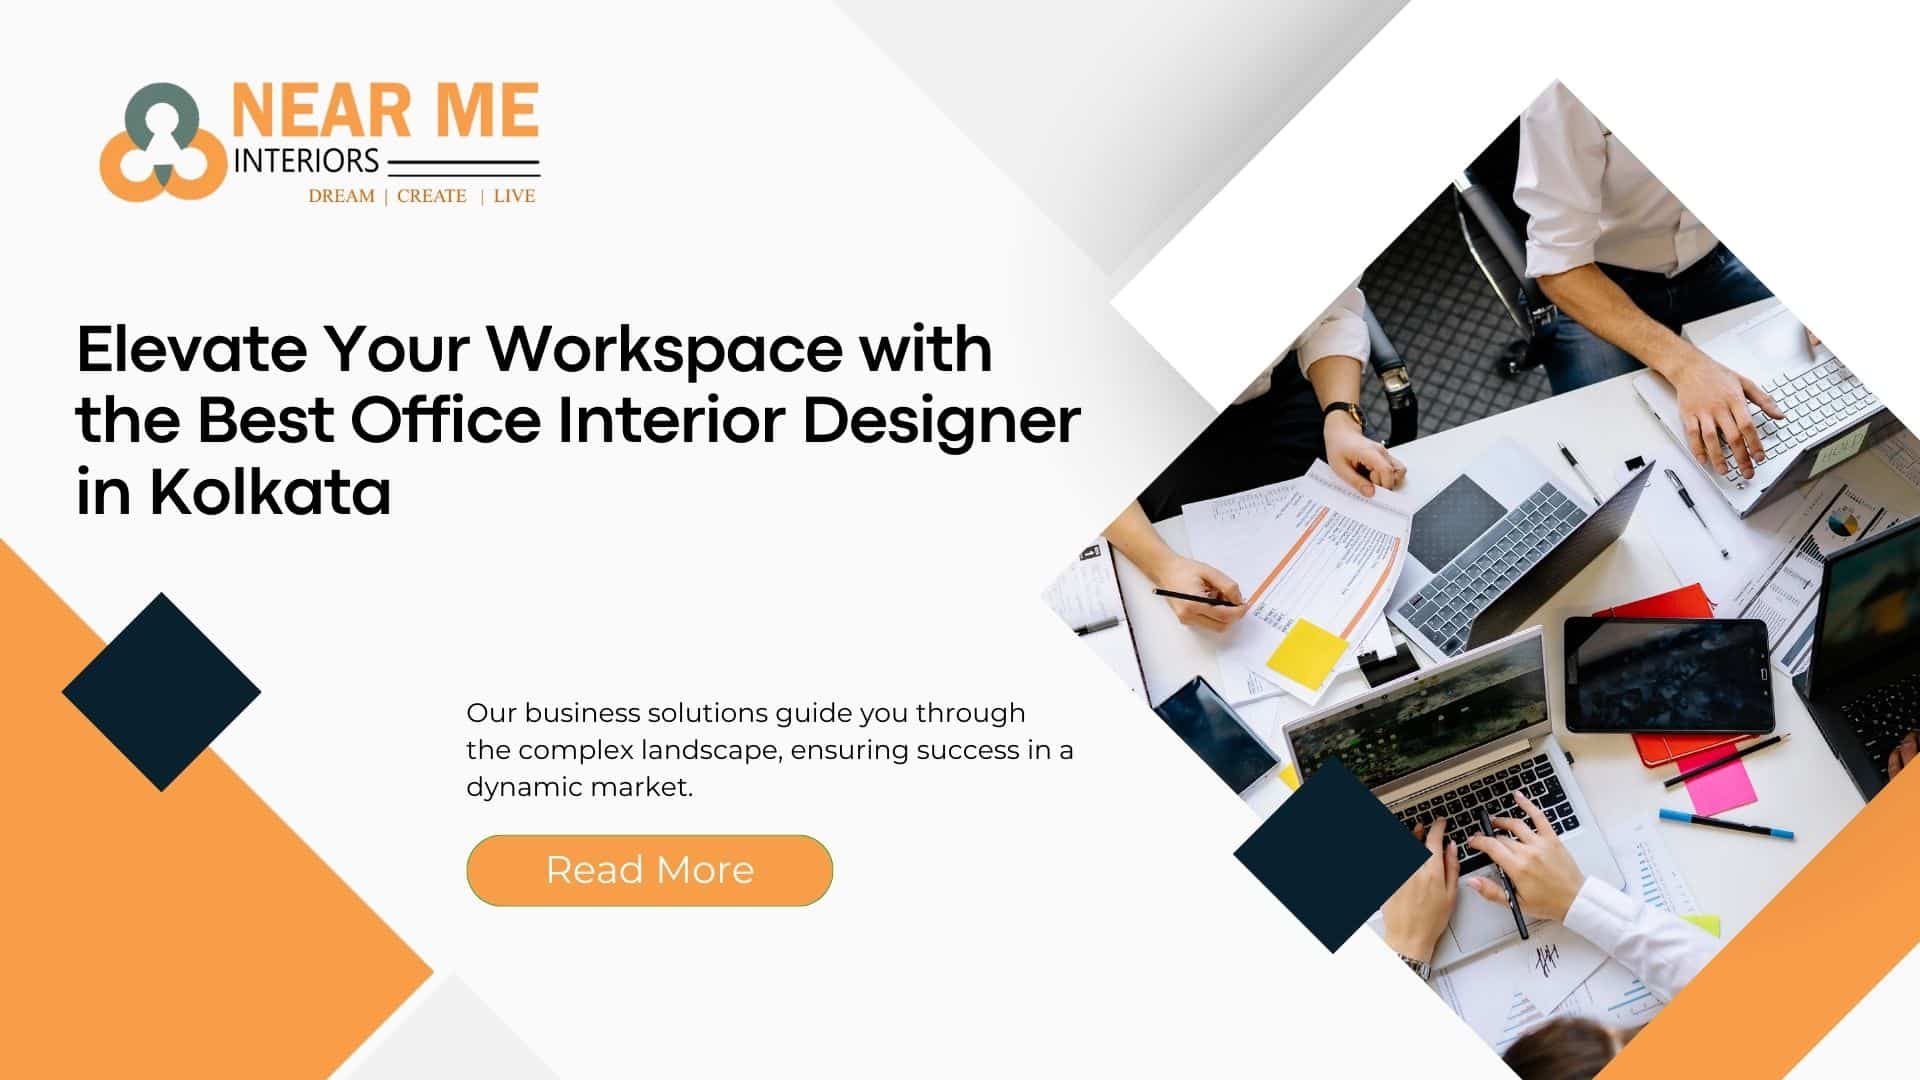 Elevate Your Workspace with the Best Office Interior Designer in Kolkata